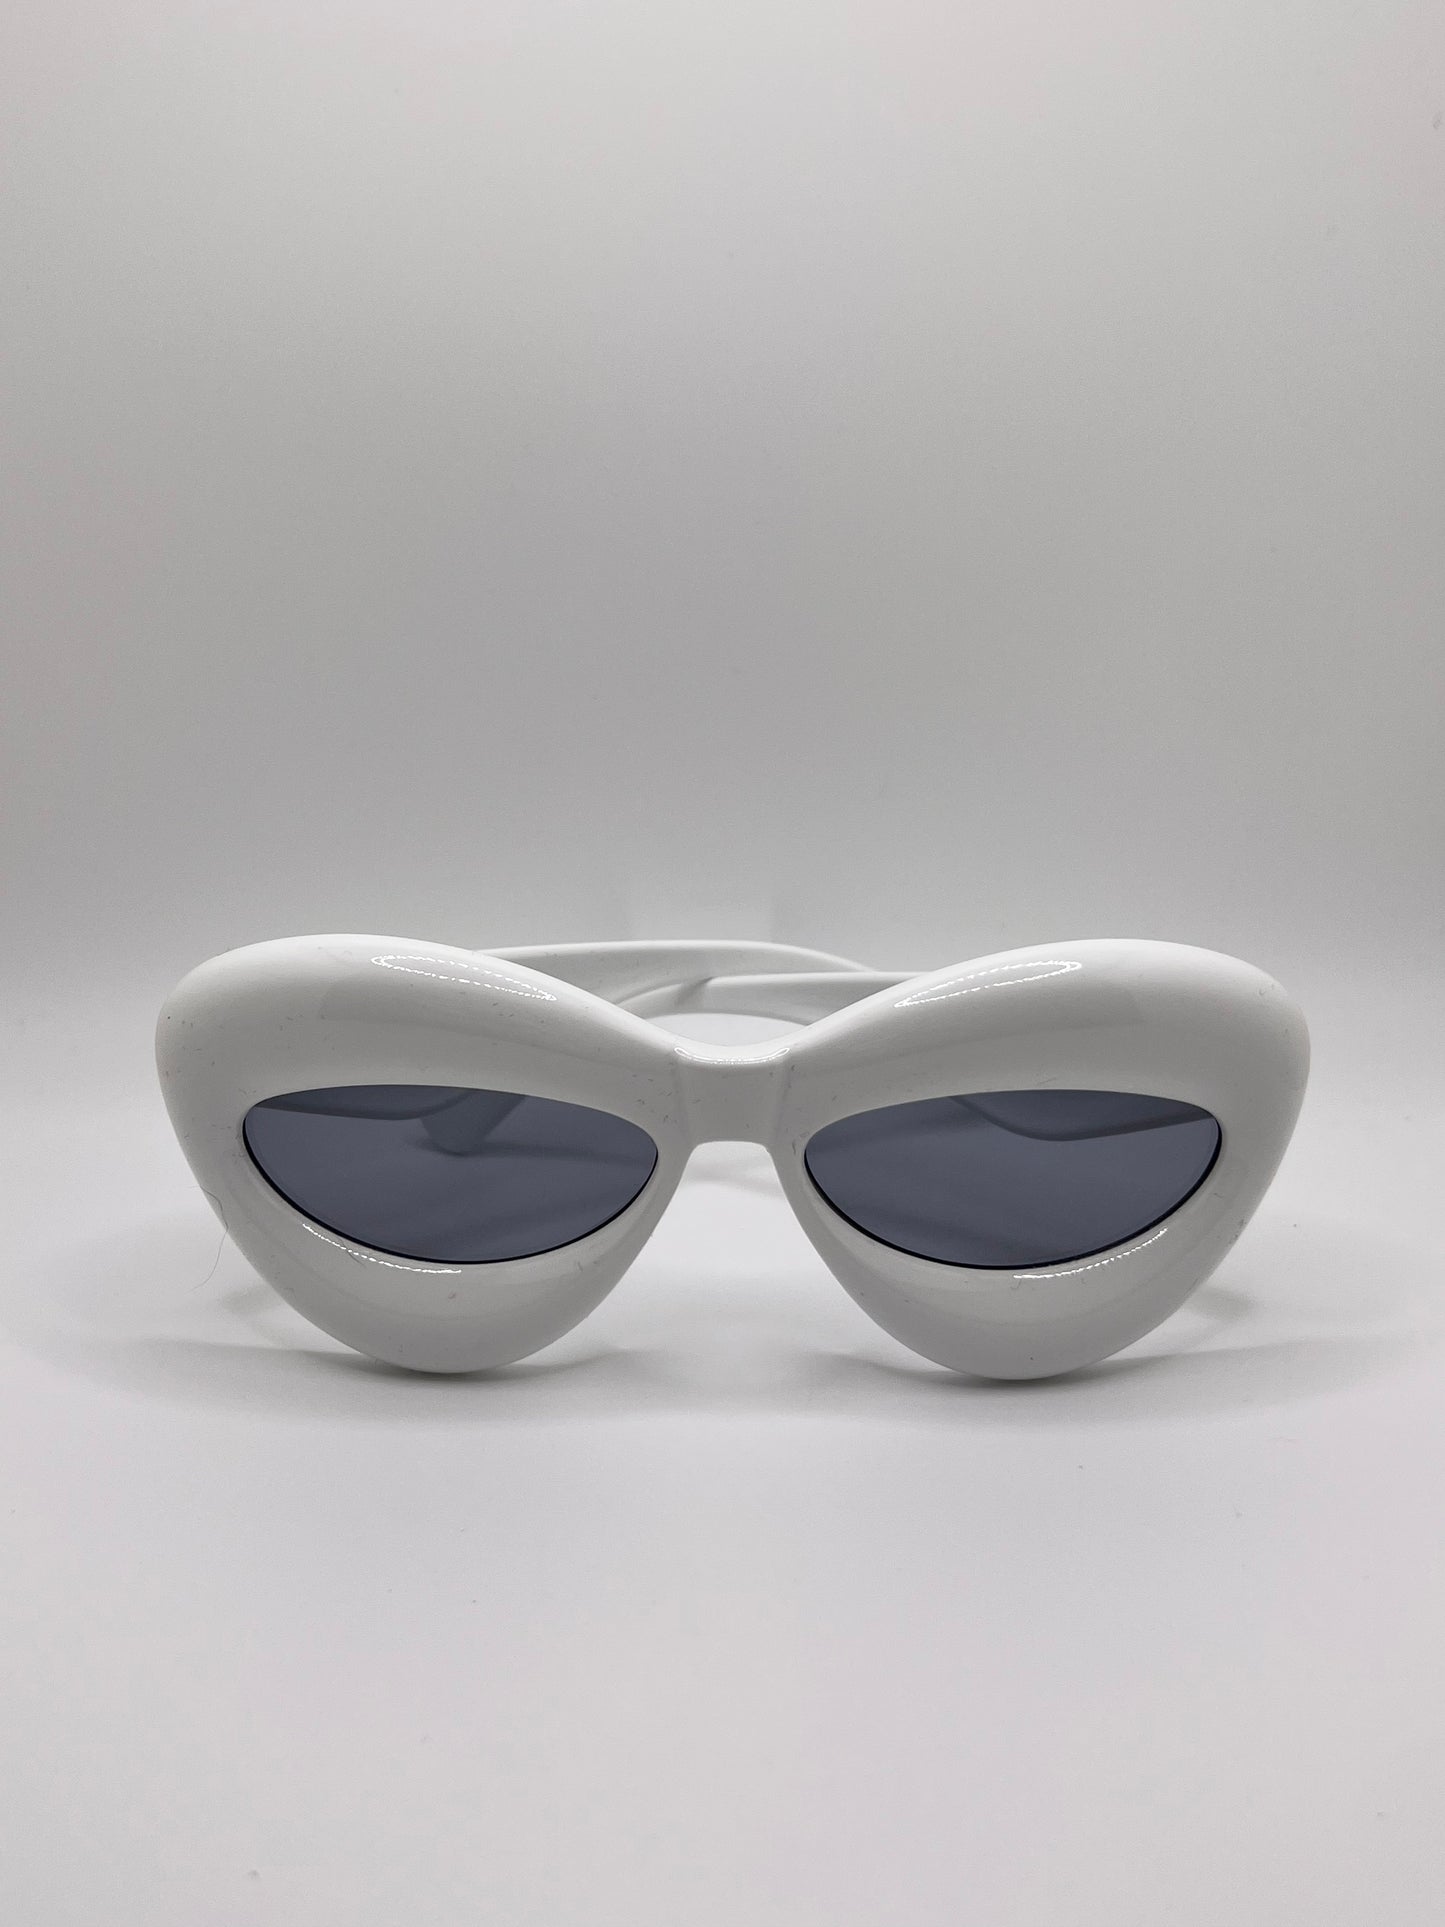 These inflated sunglasses in white are giving effortless icon. Try them in every color and add a splash of extra to any outfit. These work for formal events or a day of errands and will make you feel glam every step of the way.